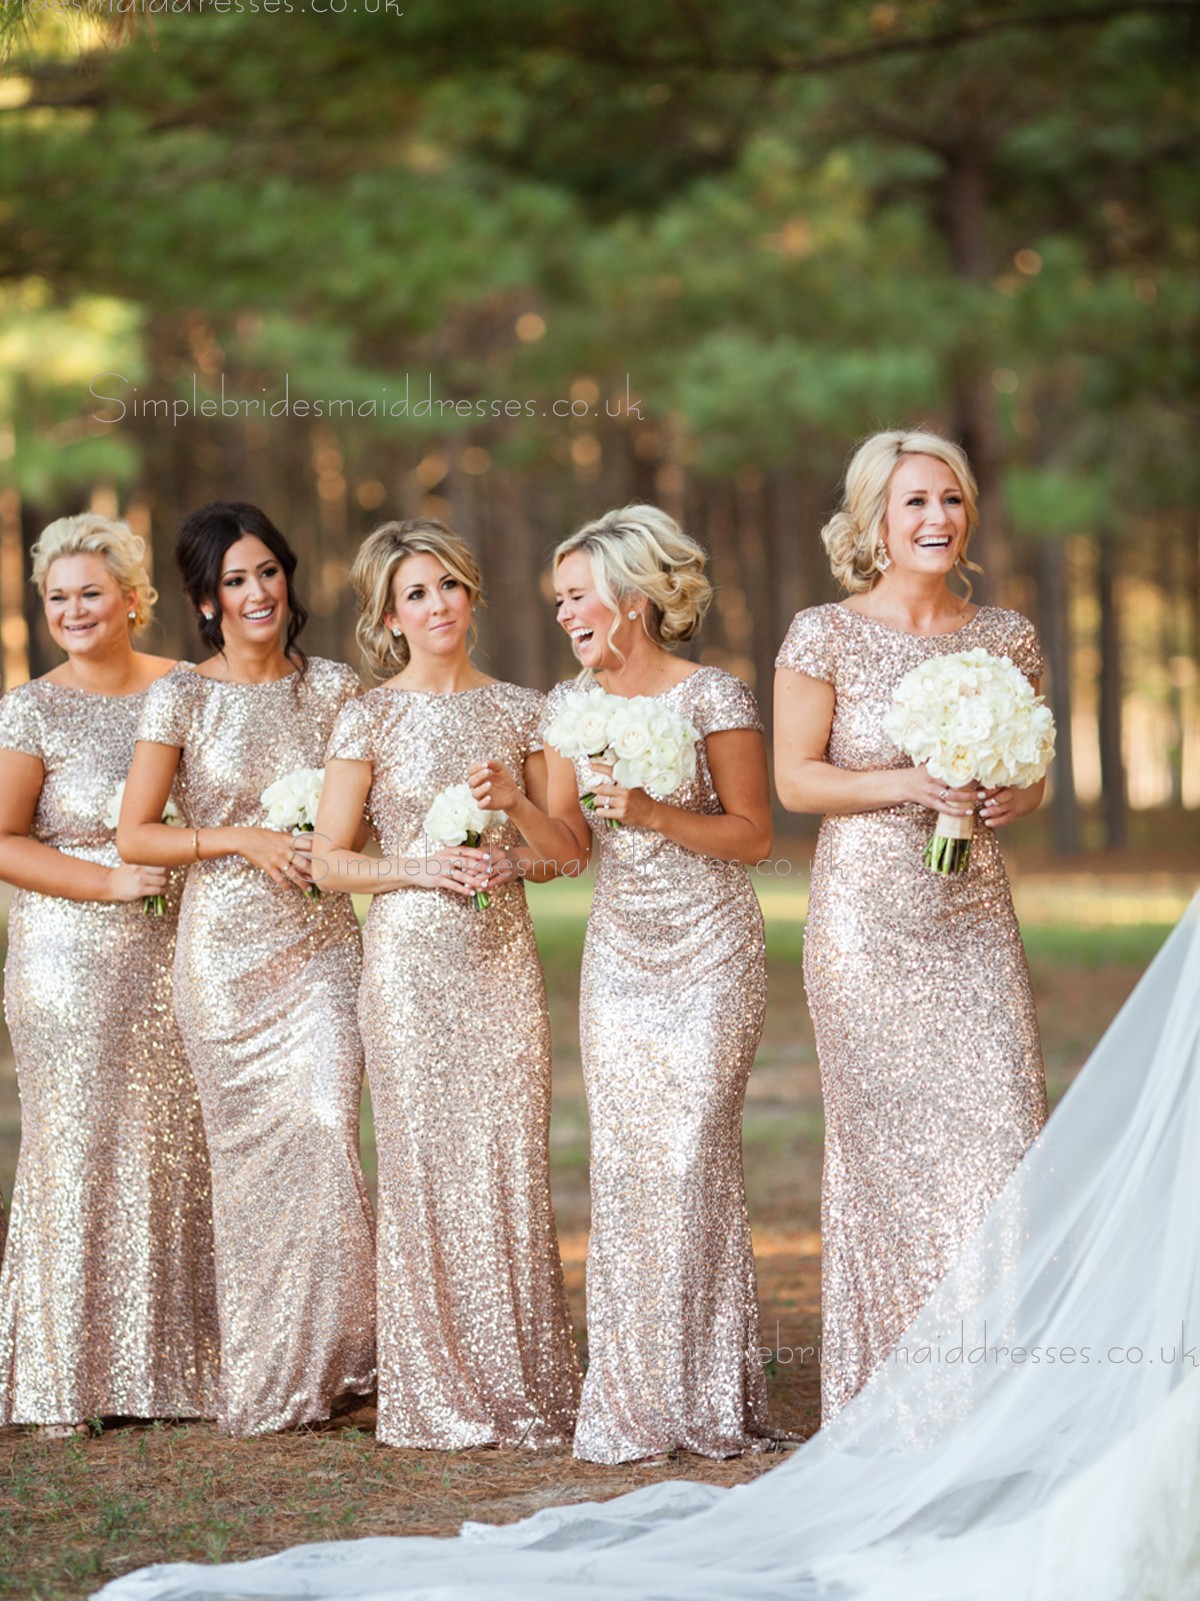 Hot Sale Sparkly Sequin Mermaid Long Gold / Champagne / Rose Gold  Bridesmaid Dress - Simplebridesmaiddresses.co.uk